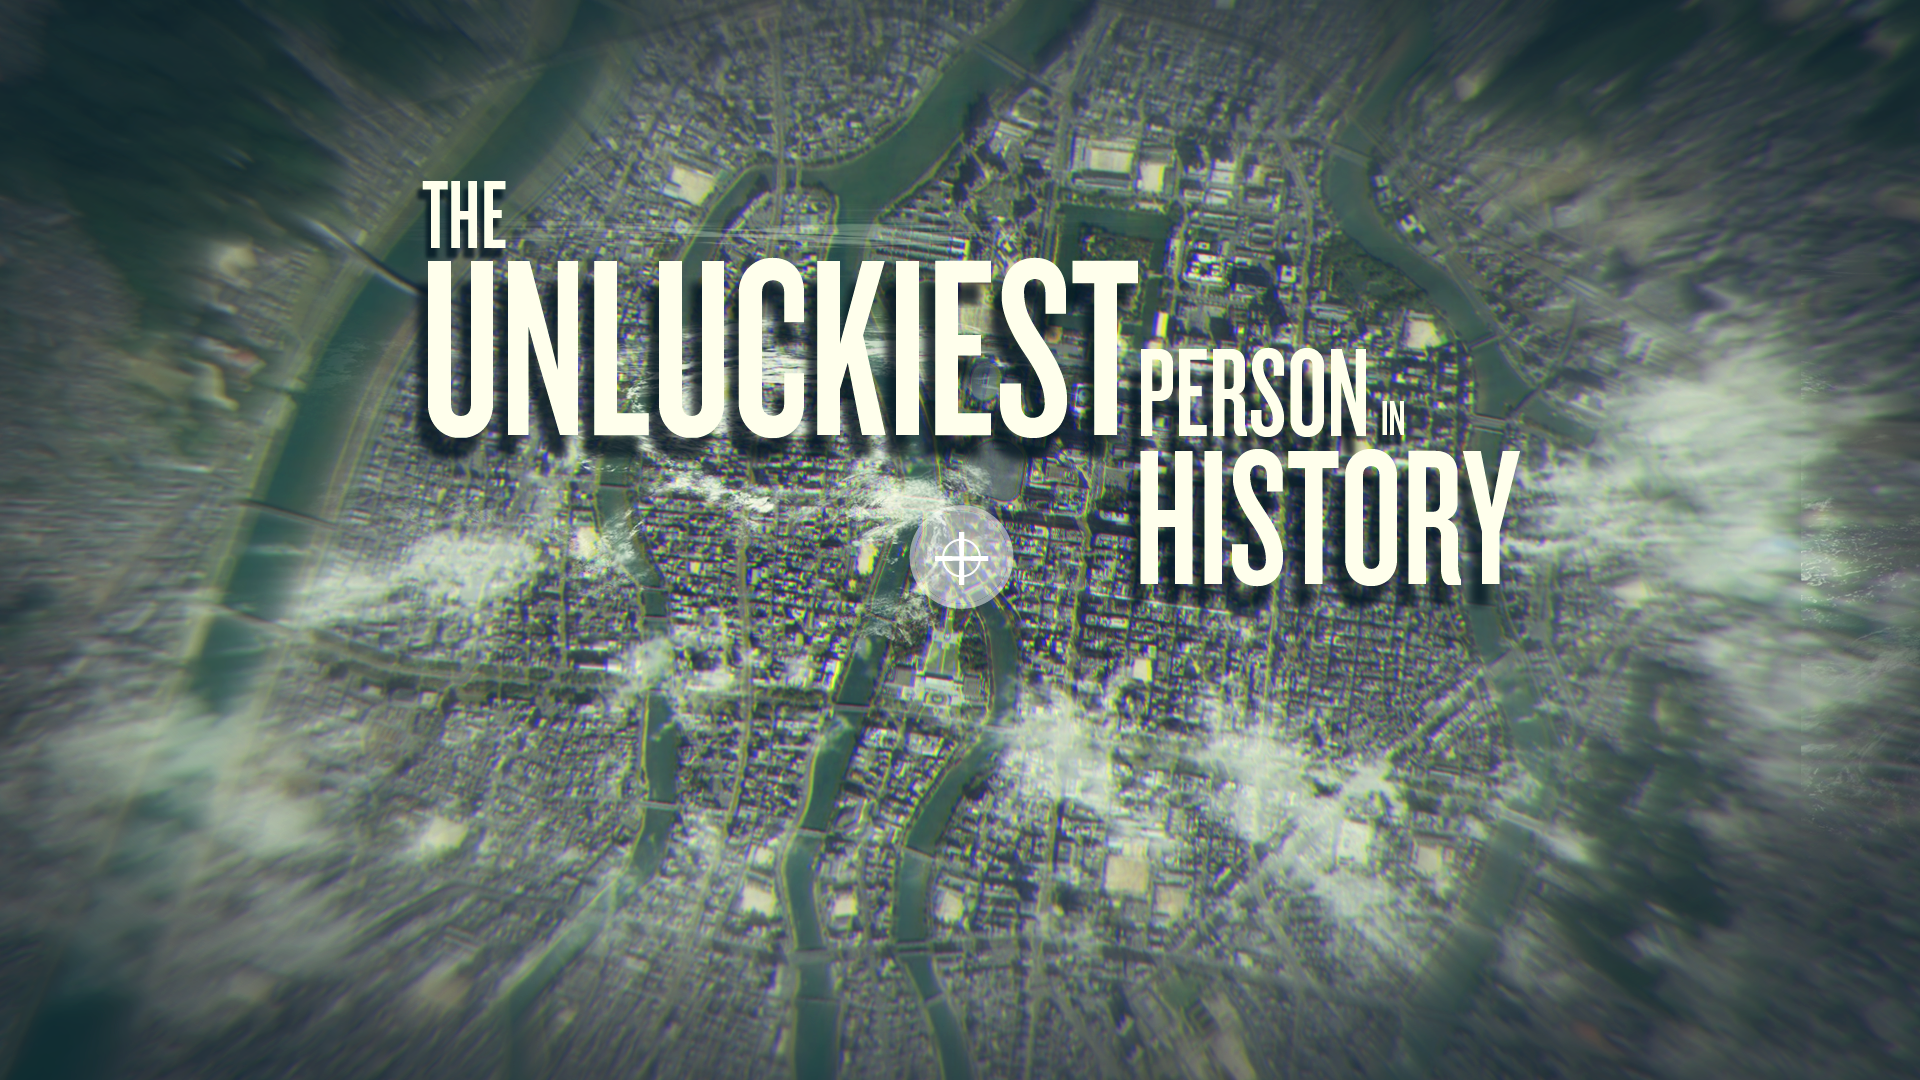 The unluckiest person in history